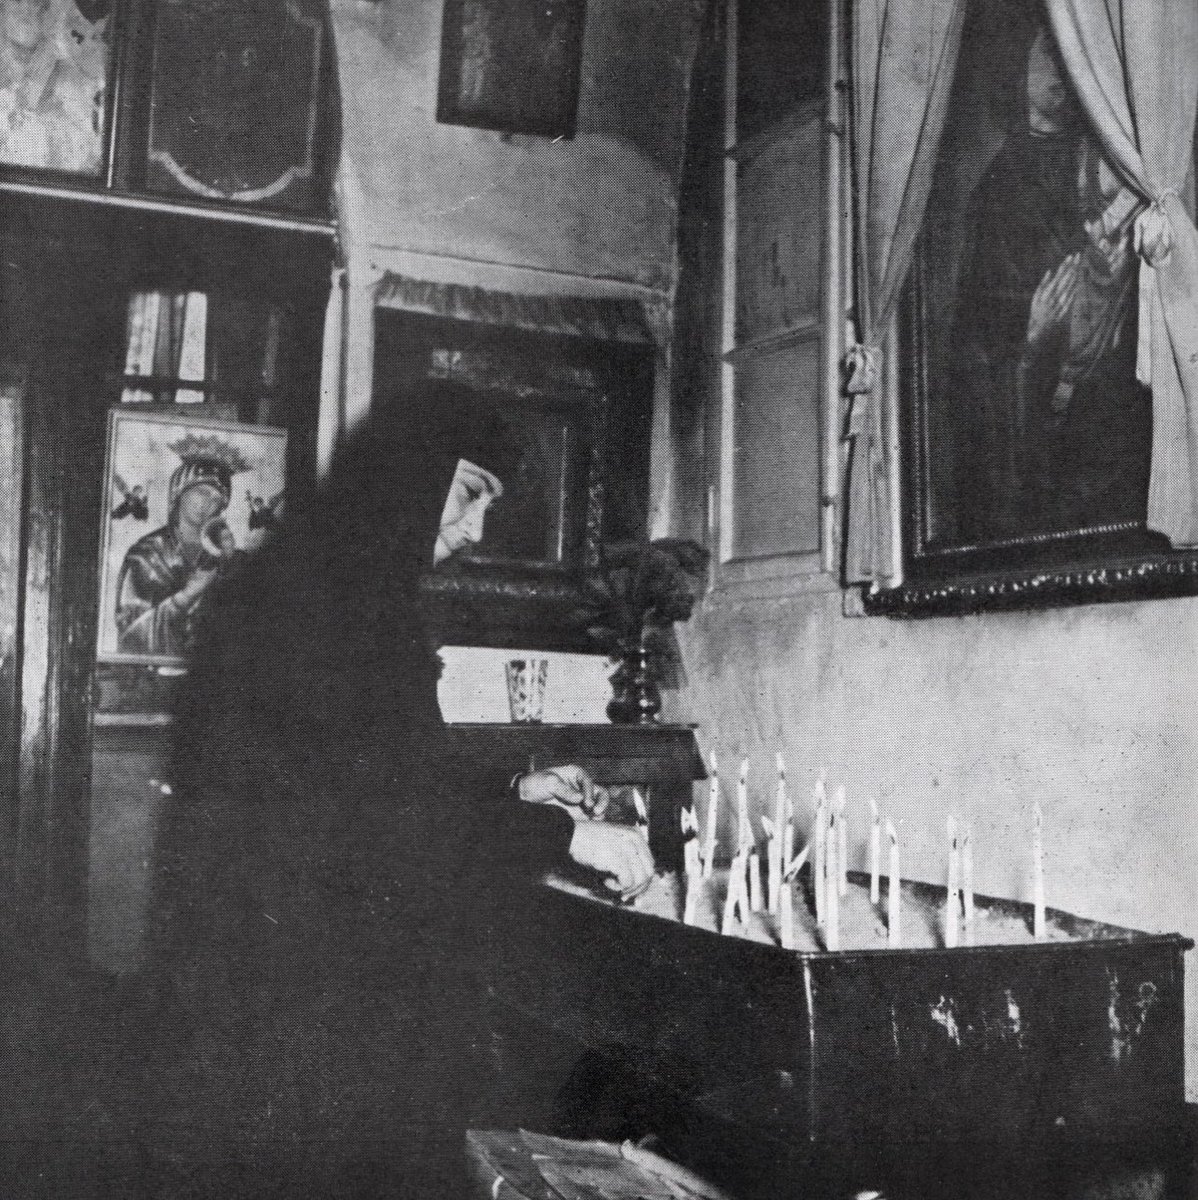 lebanese orthodox nun lighting a candle in the shrine of Sayyidat al-Nouriyyeh (Our Lady of Light) in Beirut